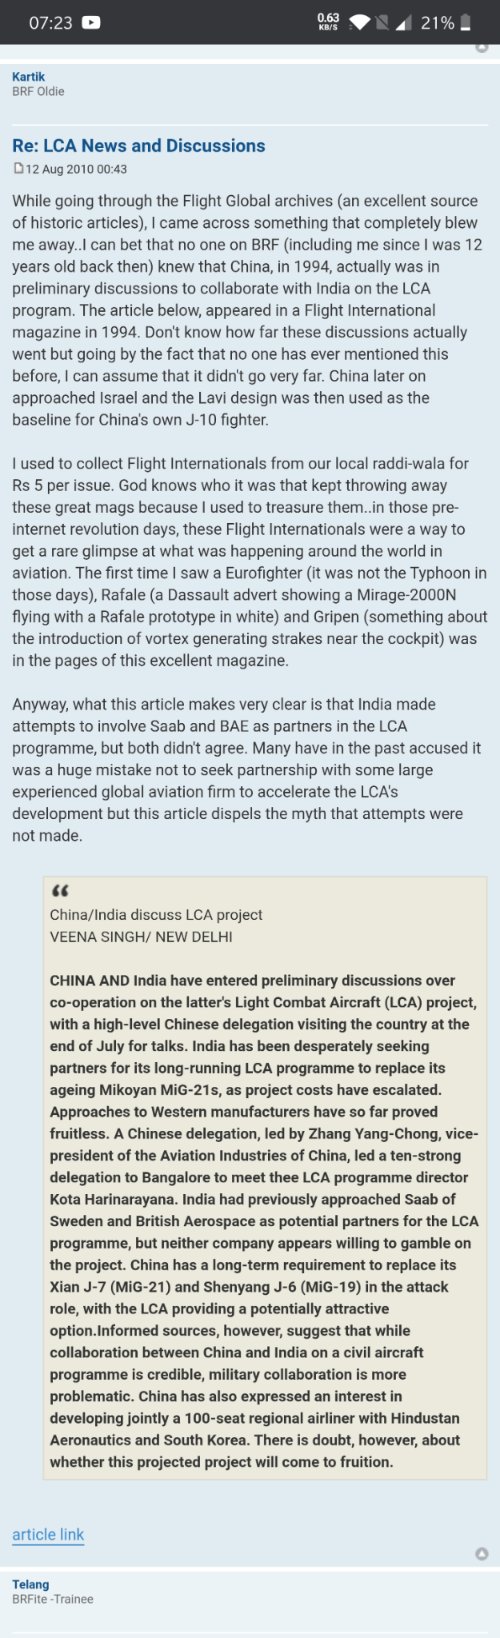 LCA as a Sinio-Indian project - bigger.JPG